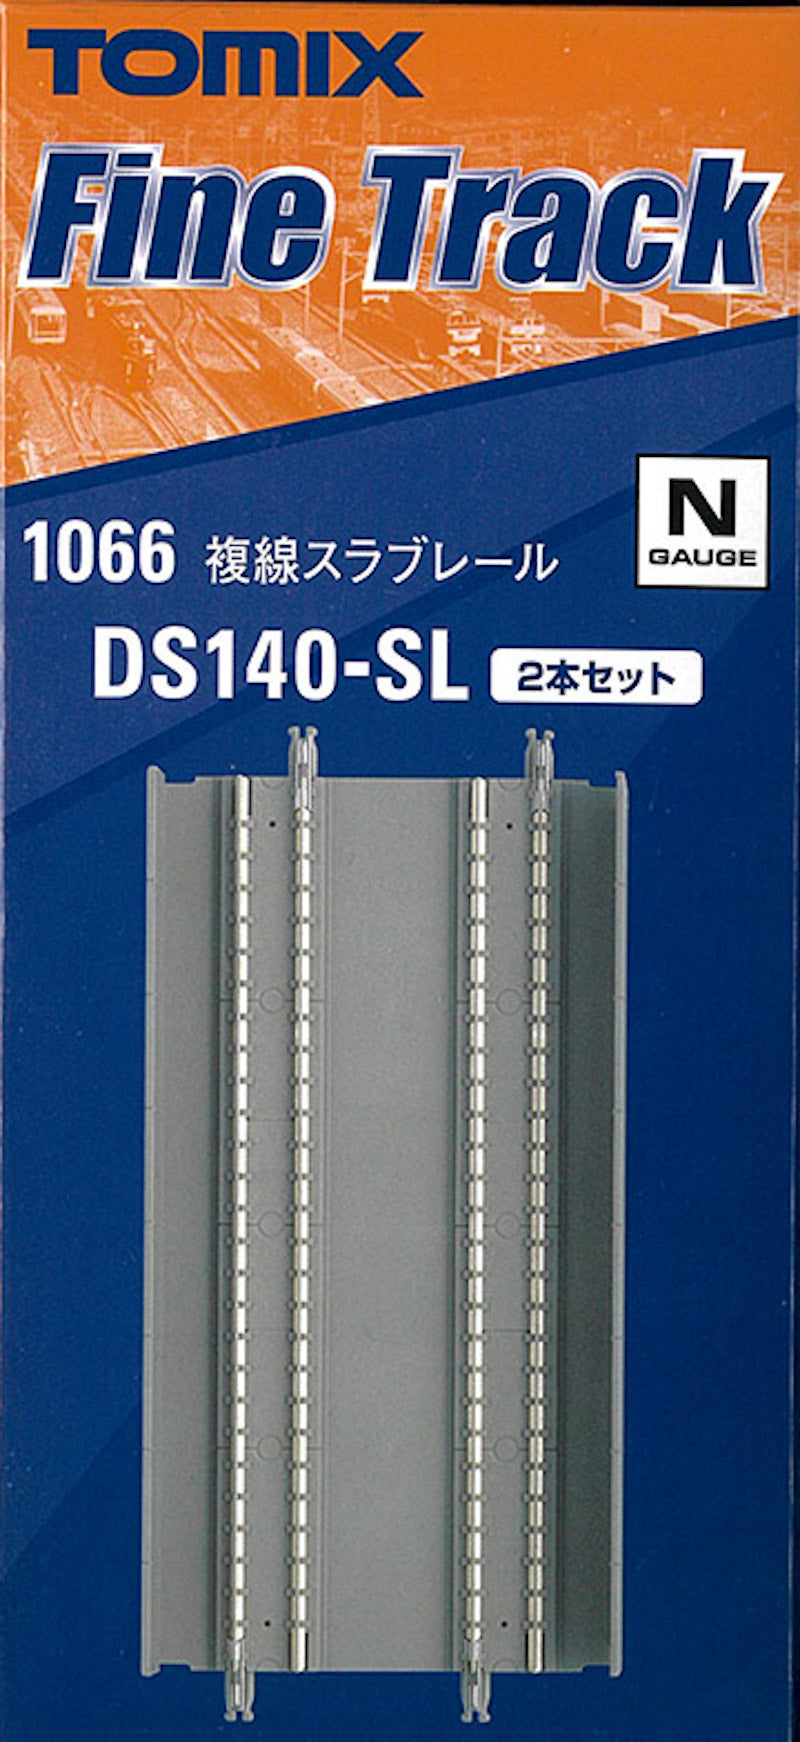 Tomix 1066 Double Track Slab Track DS140-SL (F) 2 pcs N Scale